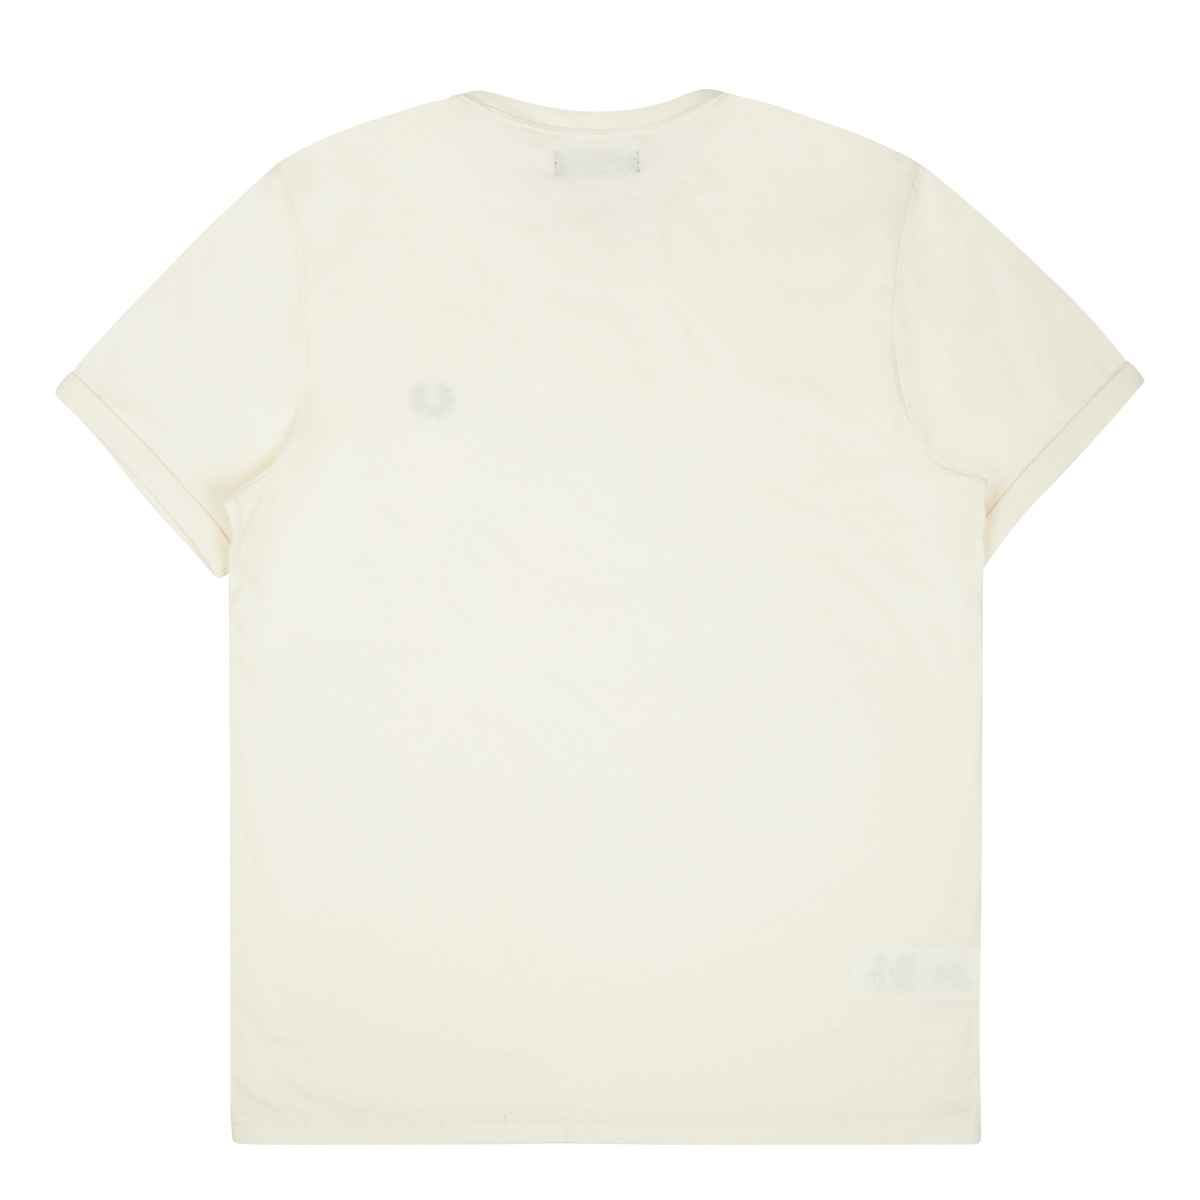 Fred Perry Ringer T-shirt R96